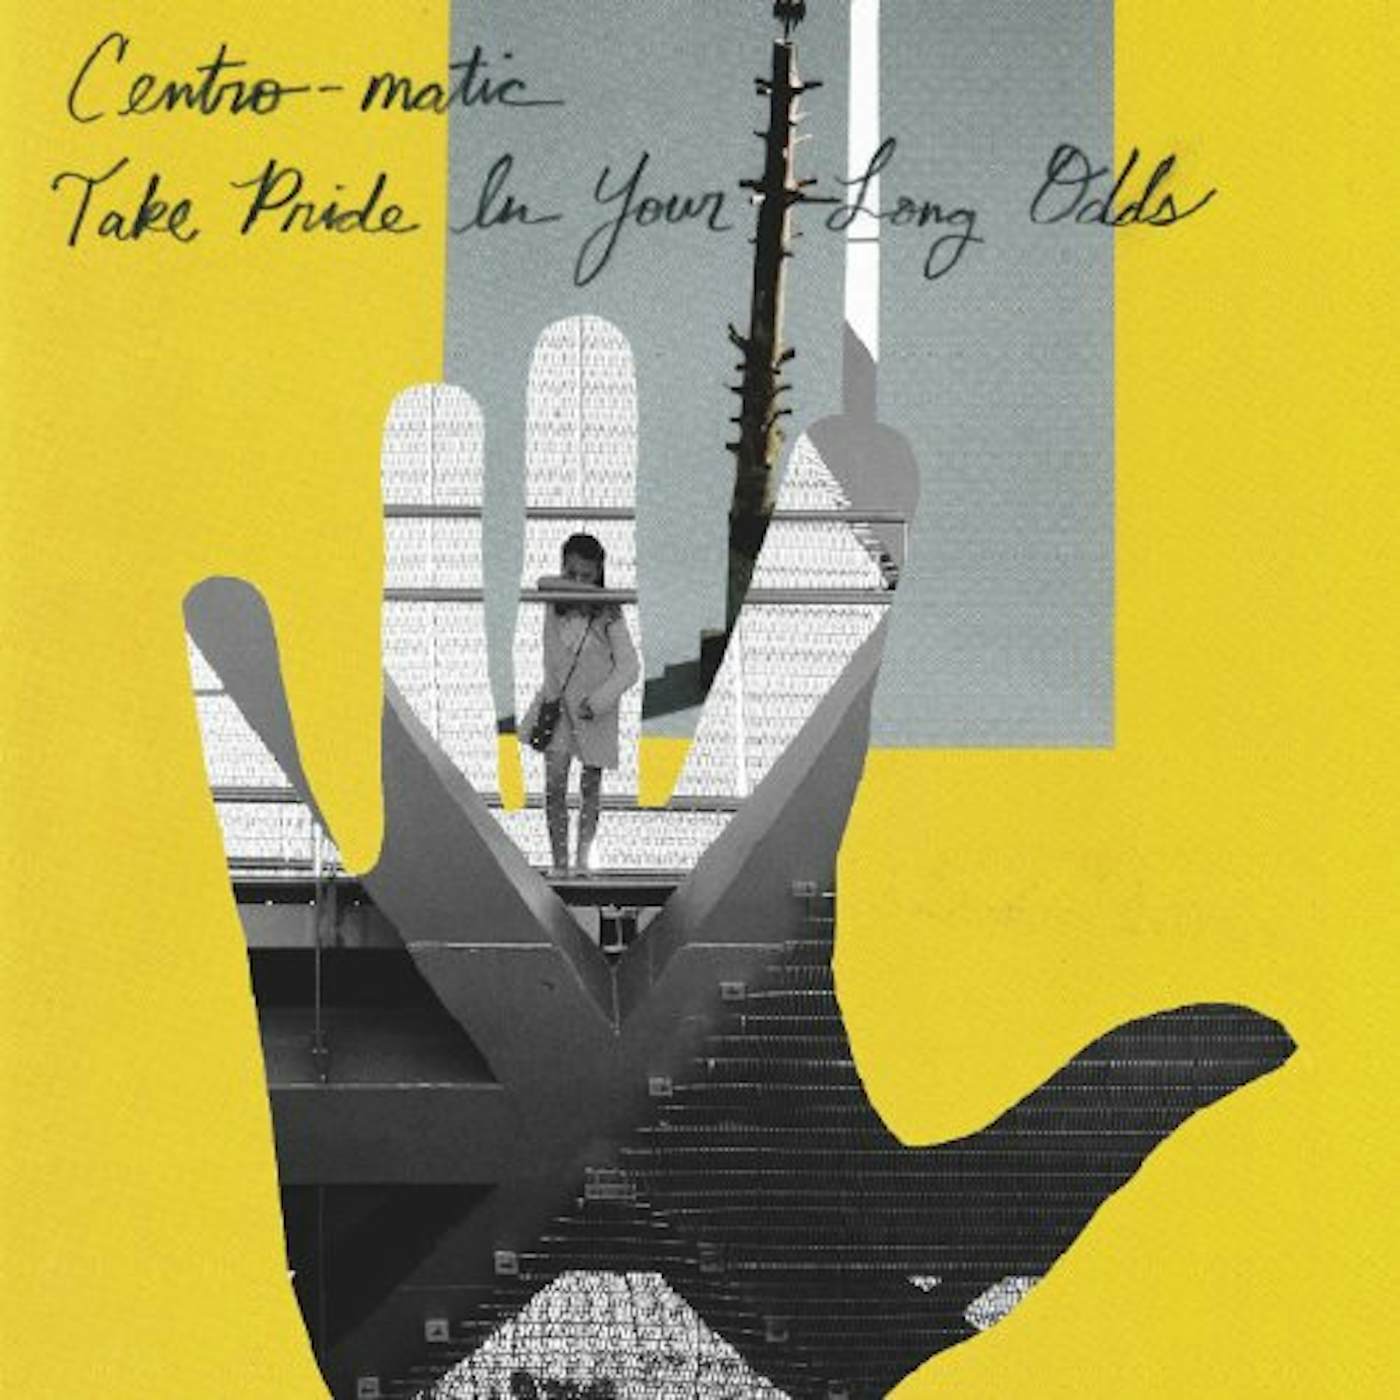 Centro-matic TAKE PRIDE IN YOUR LONG ODDS CD